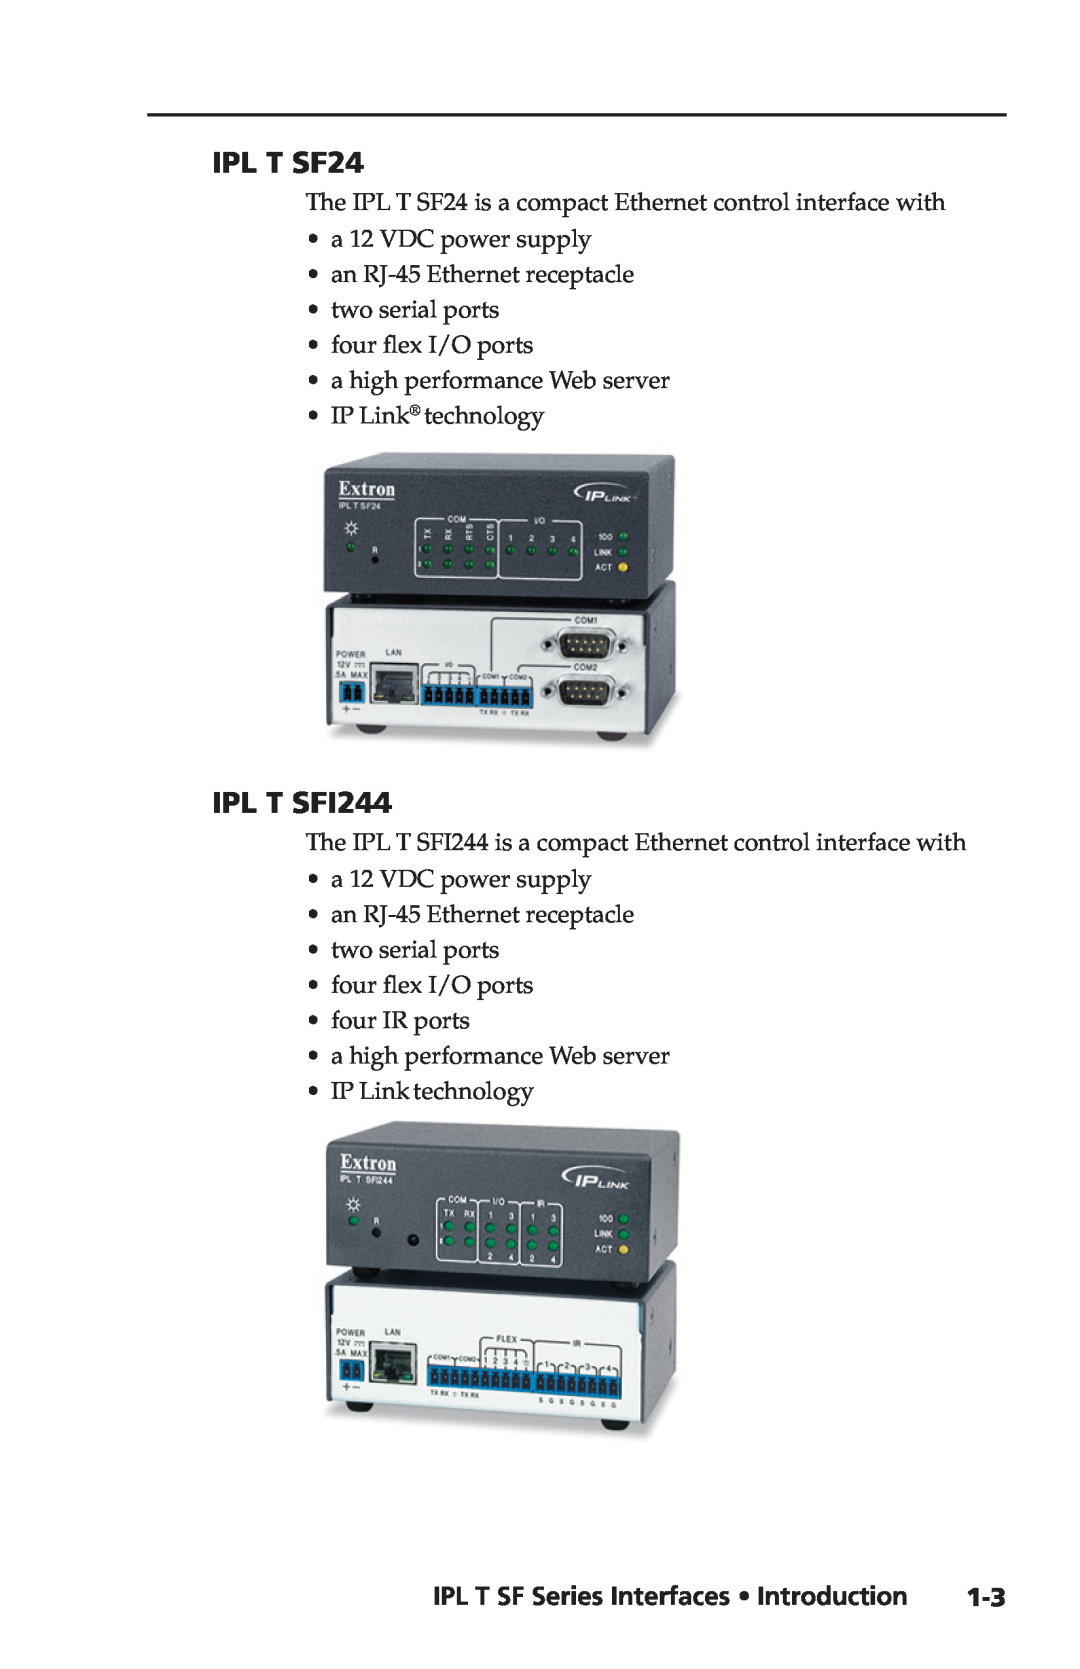 Extron electronic setup guide IPL T SF24, IPL T SFI244, IPL T SF Series Interfaces Introduction 